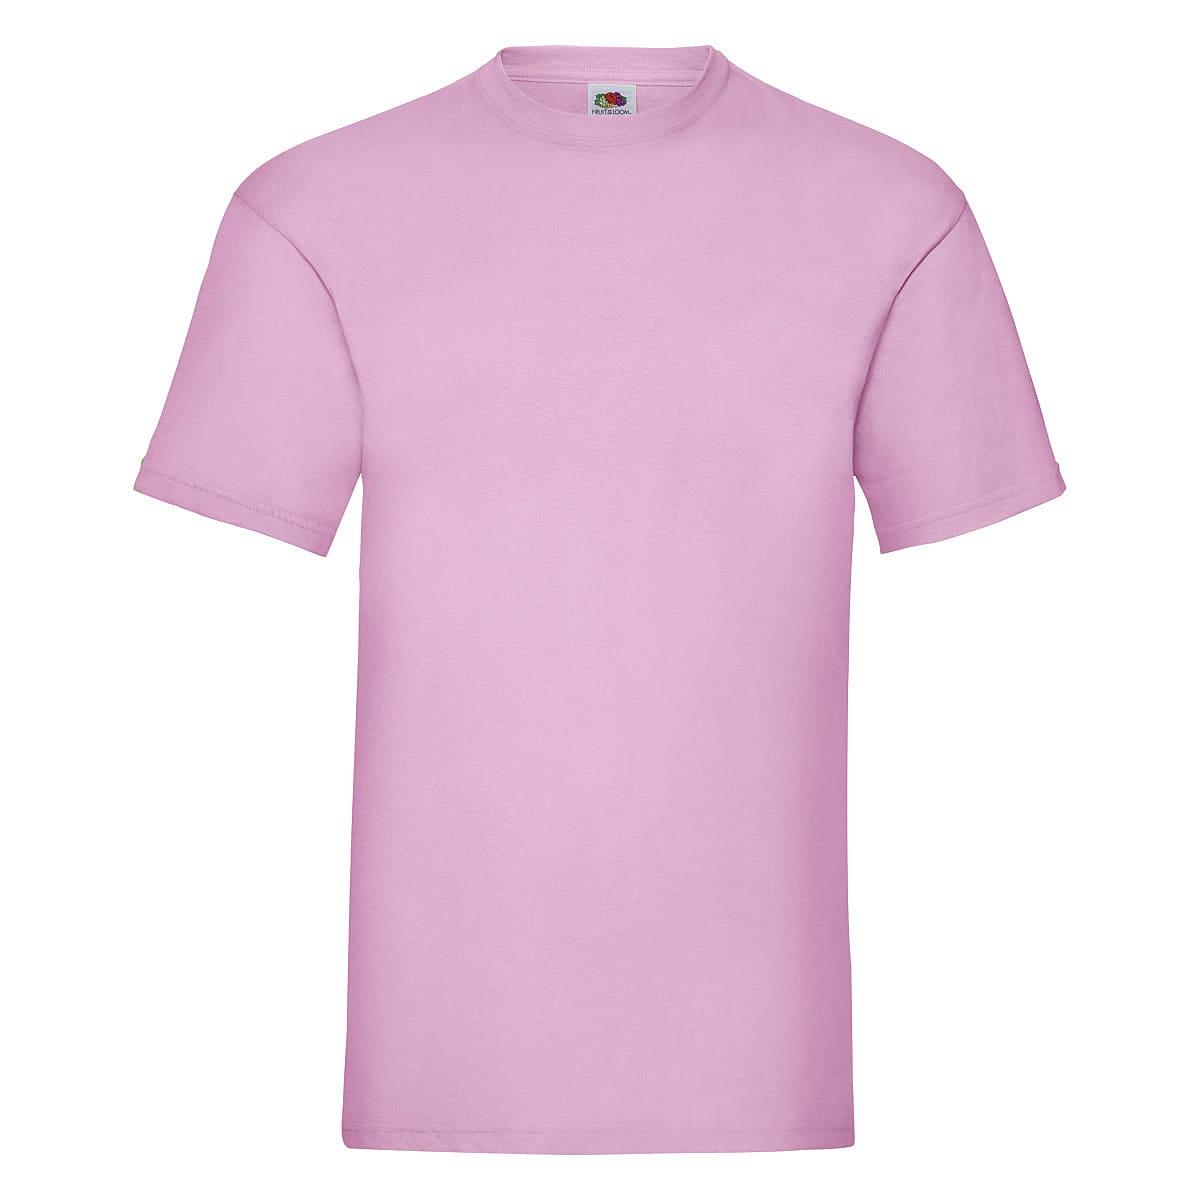 Fruit Of The Loom Valueweight T-Shirt in Light Pink (Product Code: 61036)